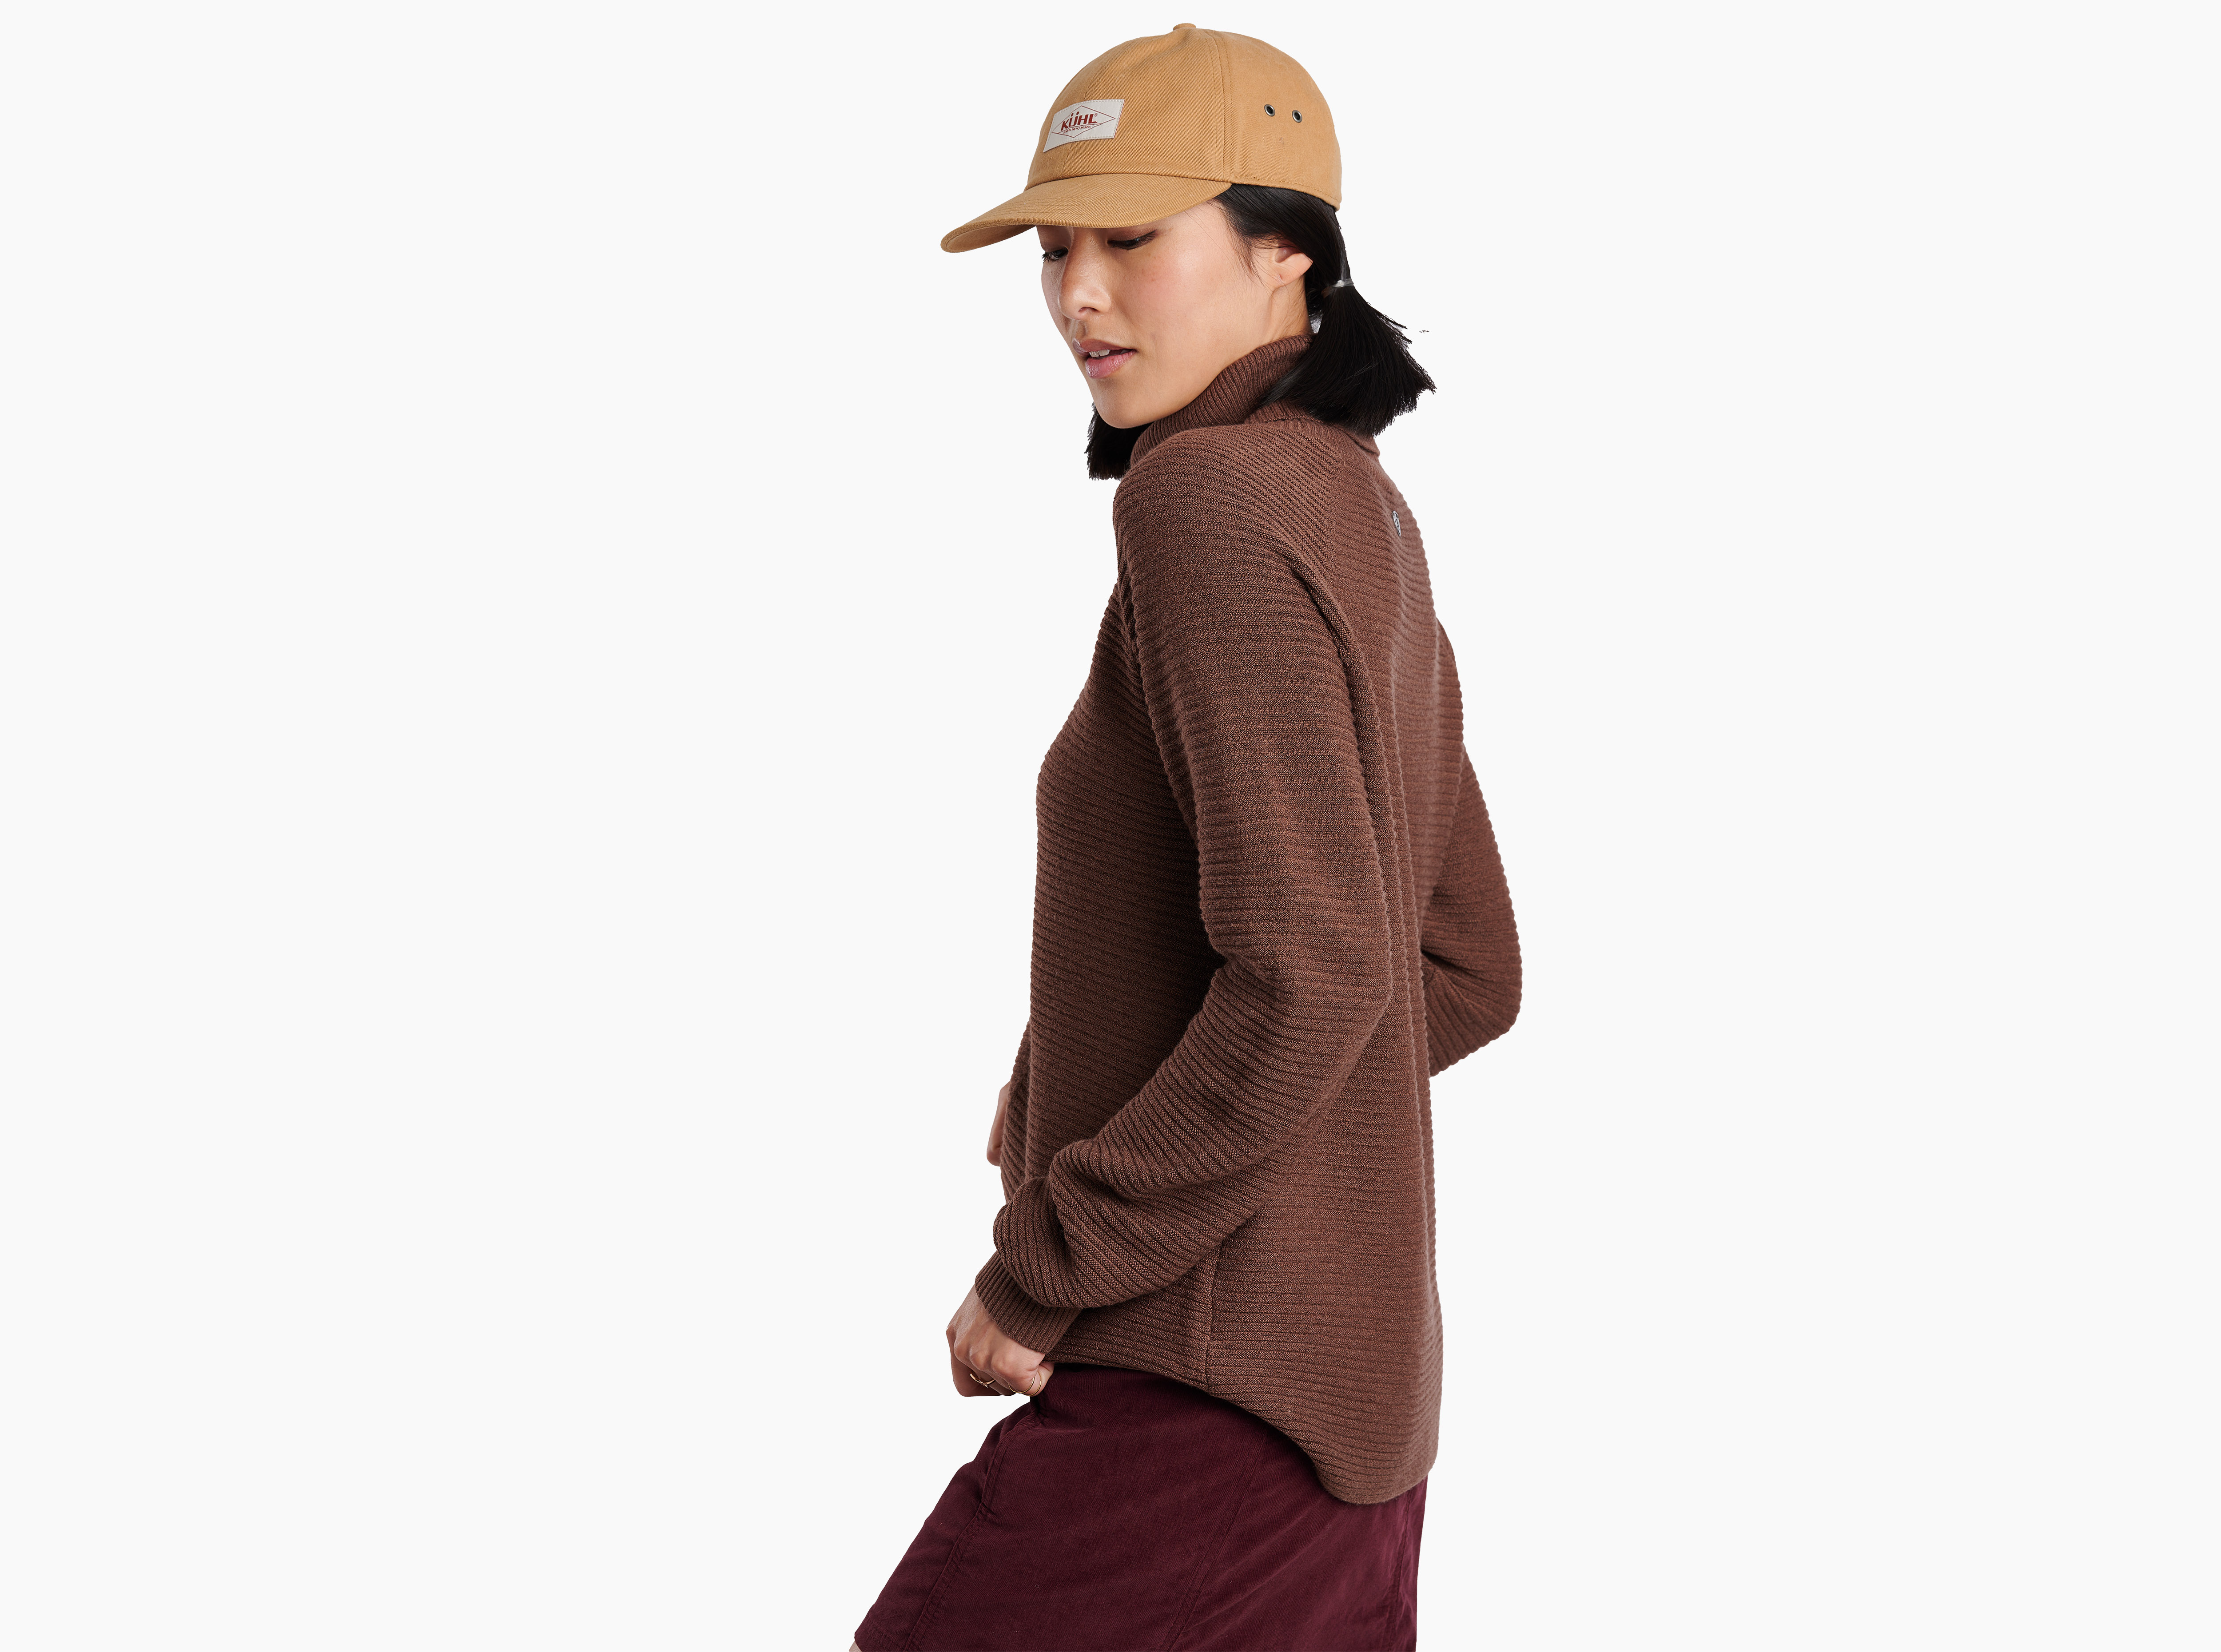 W Solace Sweater